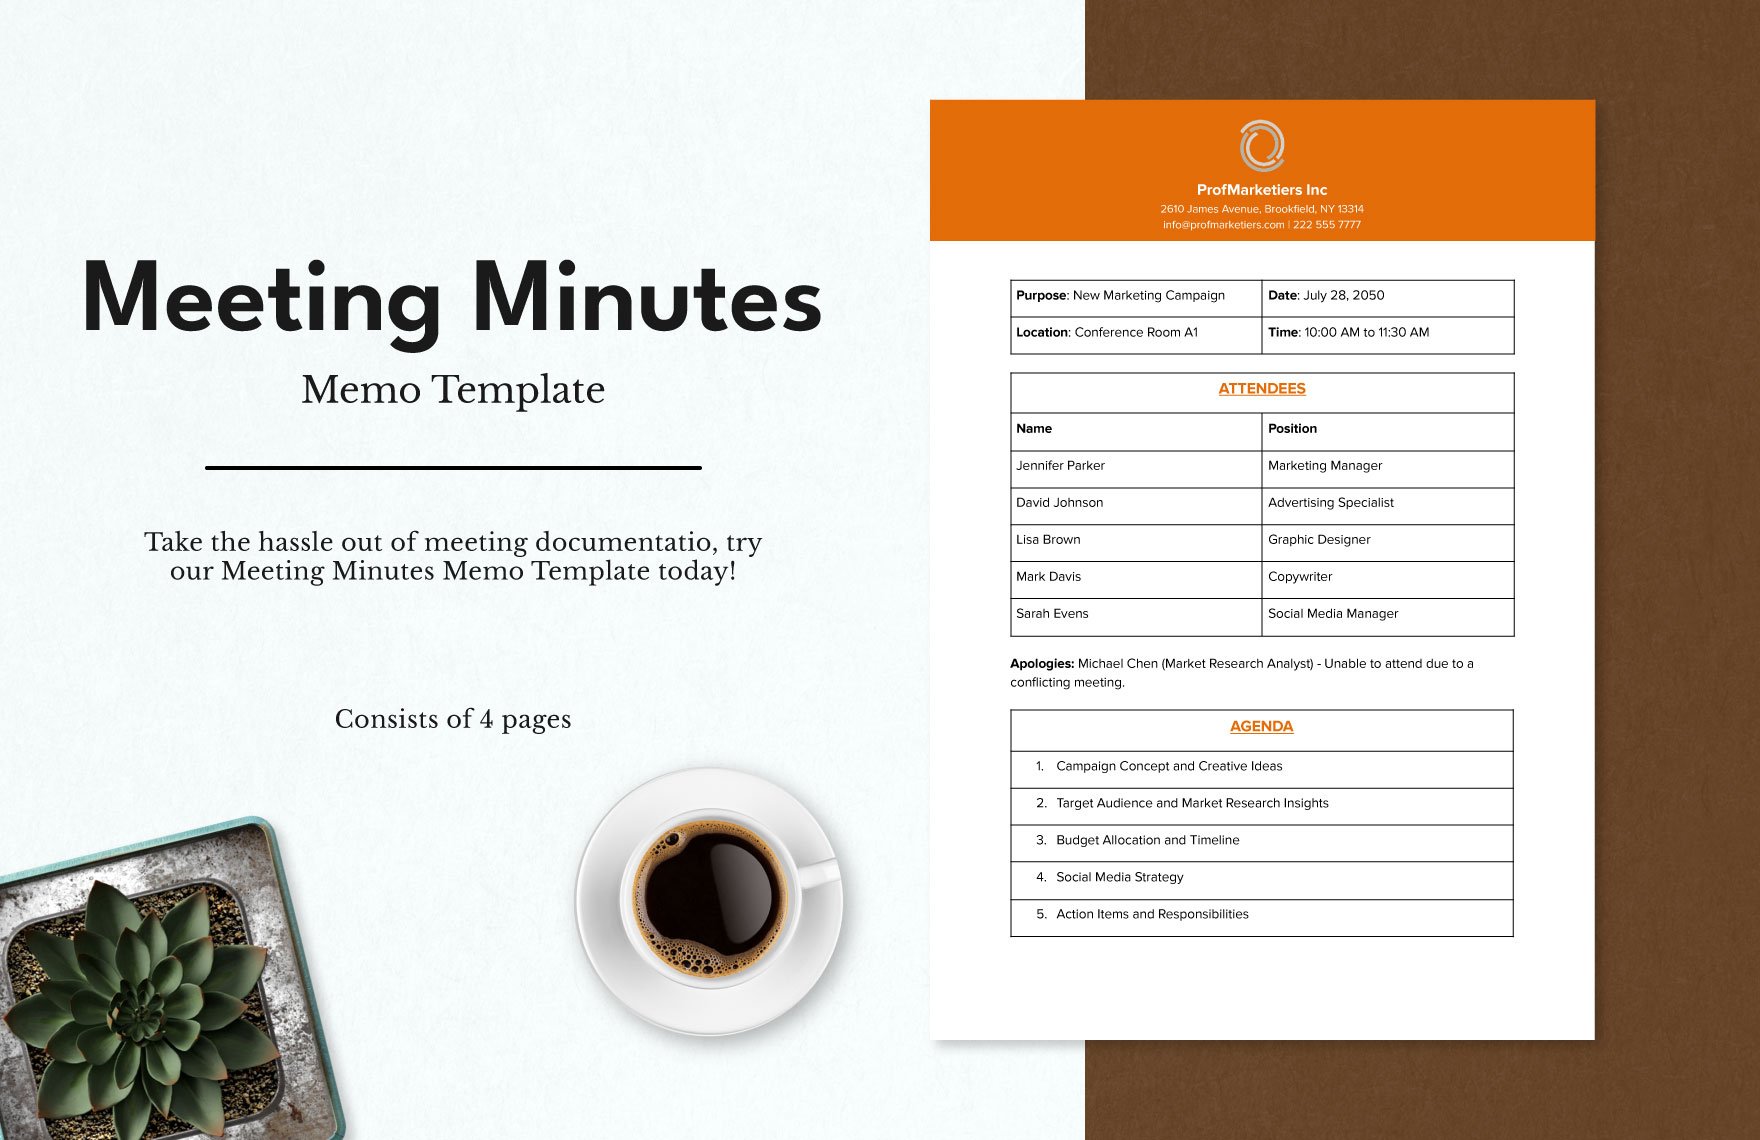 Meeting Minutes Memo Template in Word, Google Docs, PDF, Apple Pages